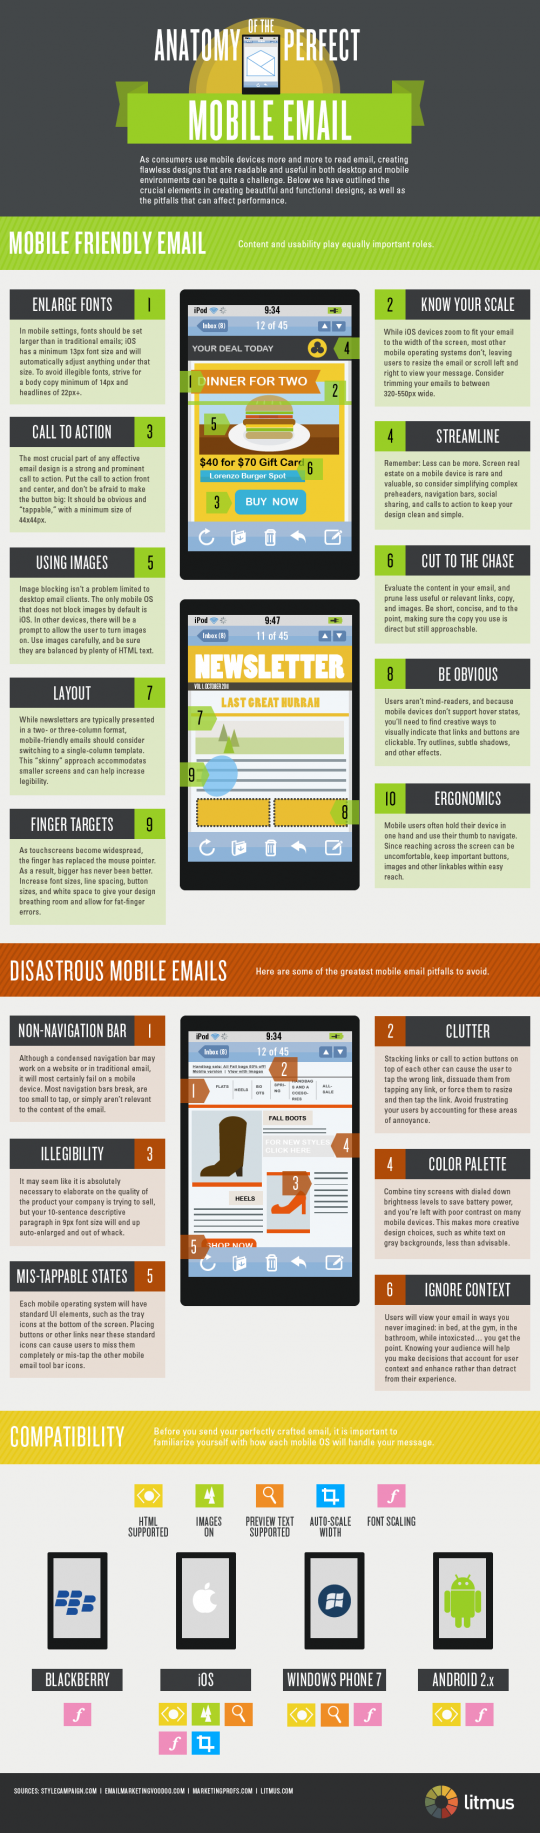 anatomy of a mobile email